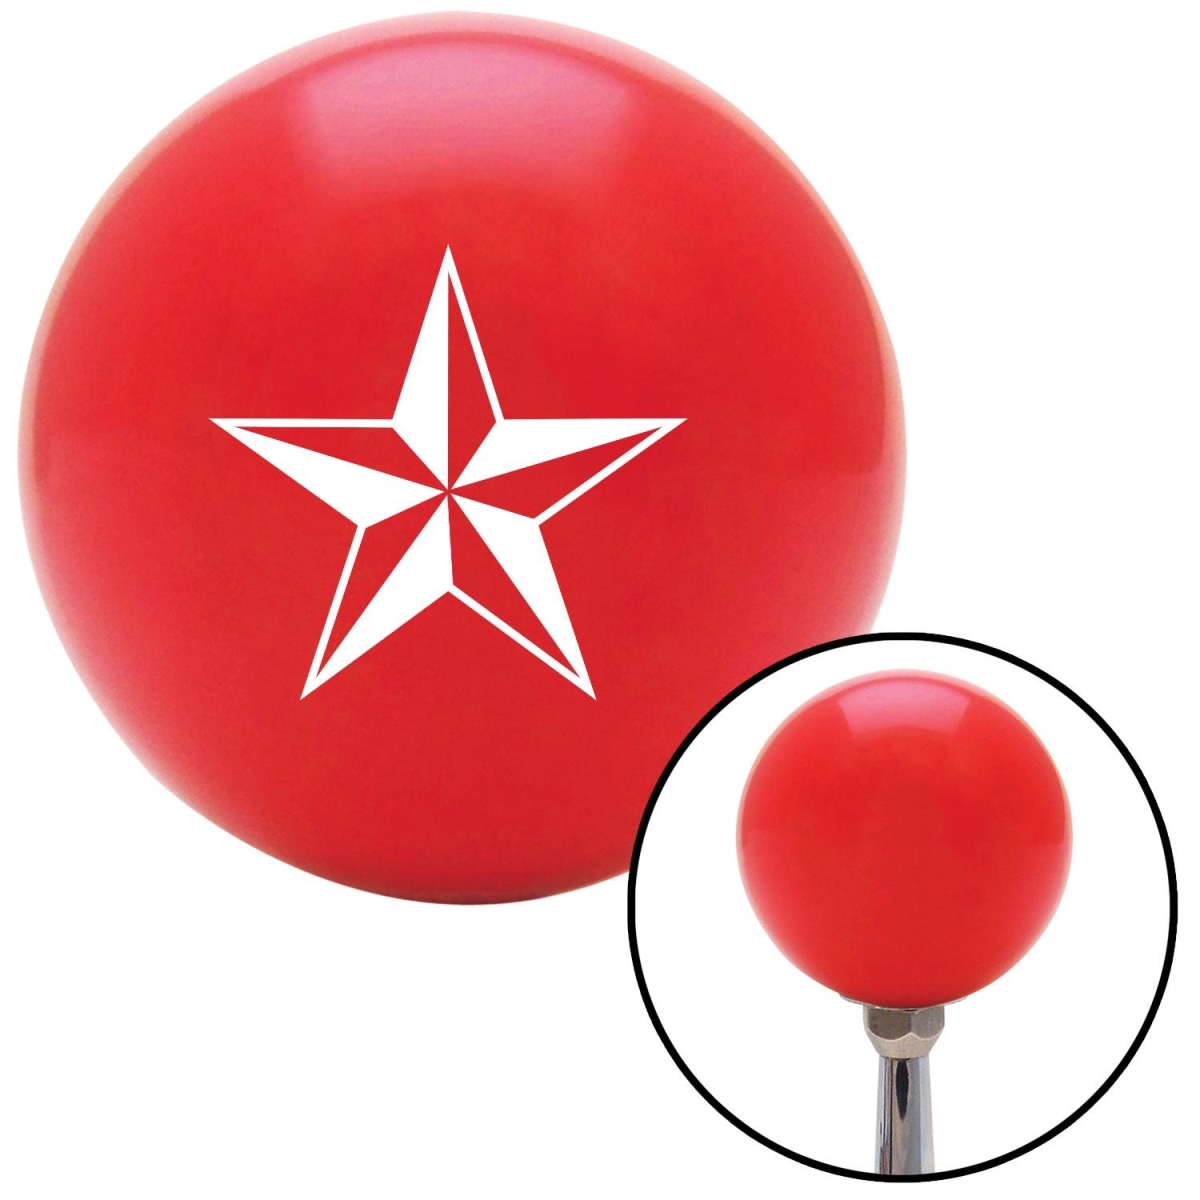 Picture of American Shifter 101320 White 5 Point 3-D Star Red Shift Knob with M16 x 1.5 Insert Shifter Auto Manual